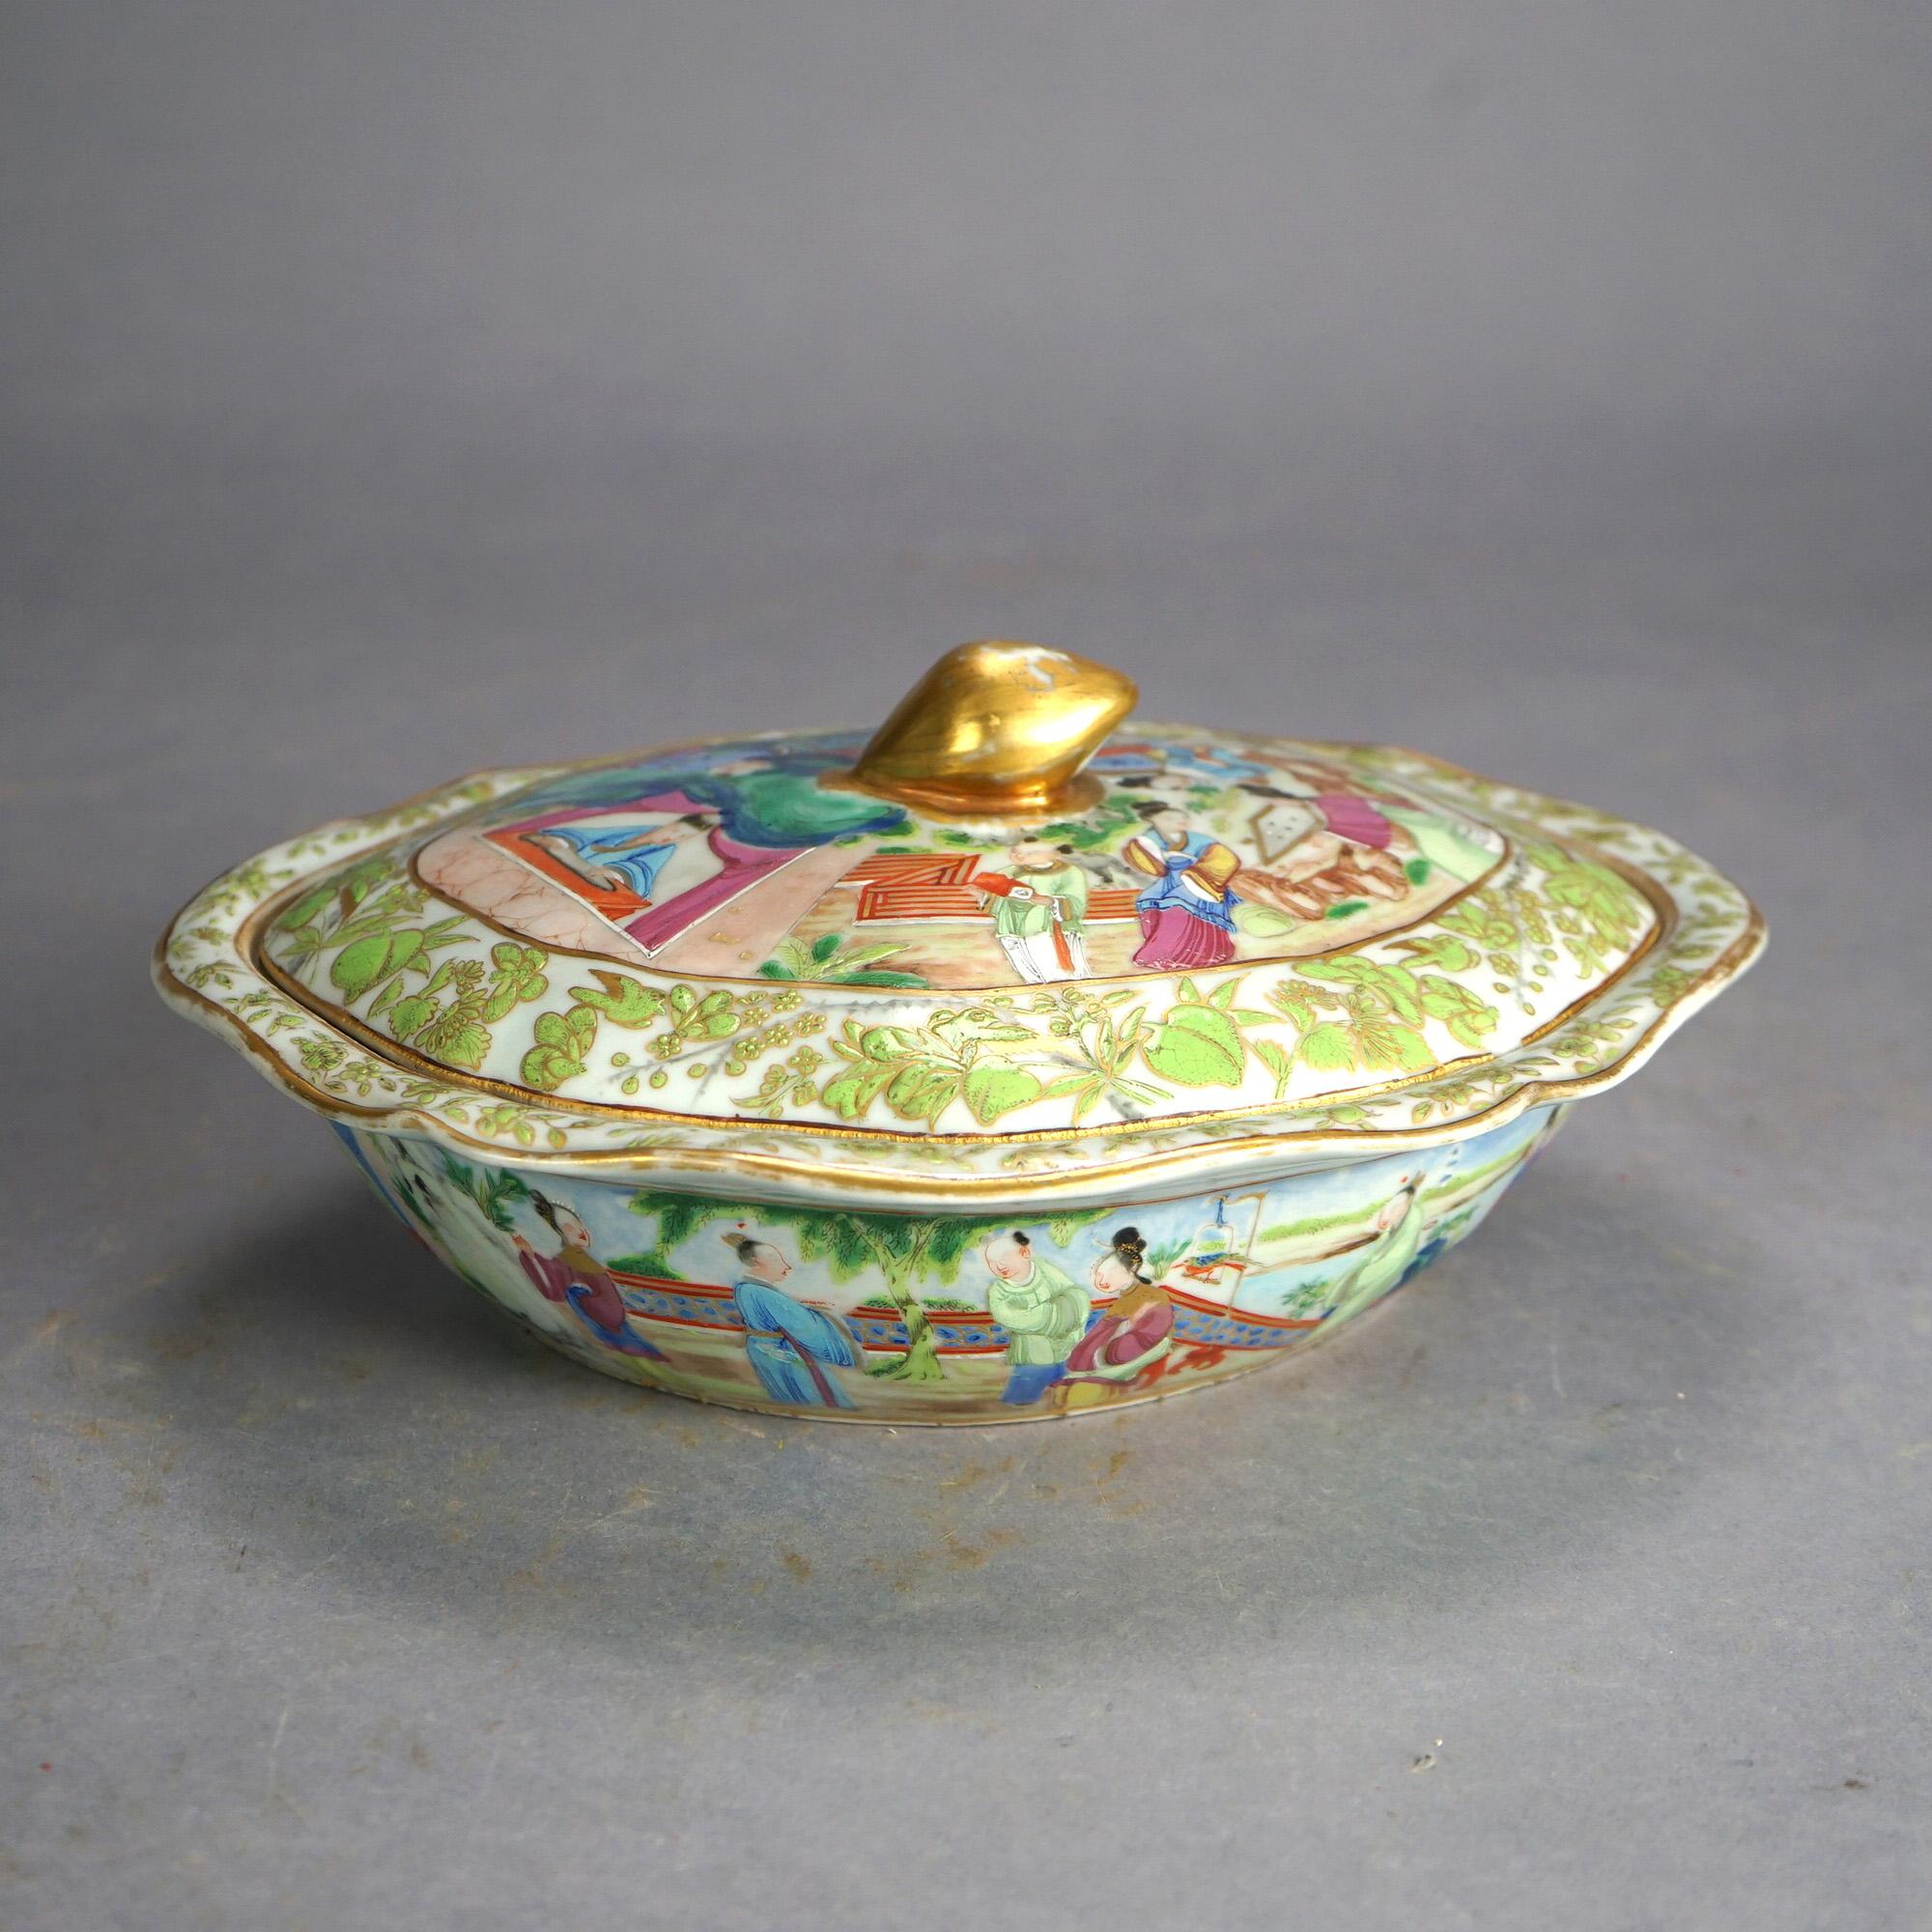 19th Century Antique Chinese Rose Medallion Hand-Painted & Gilt Porcelain Lidded Tureen 19thC